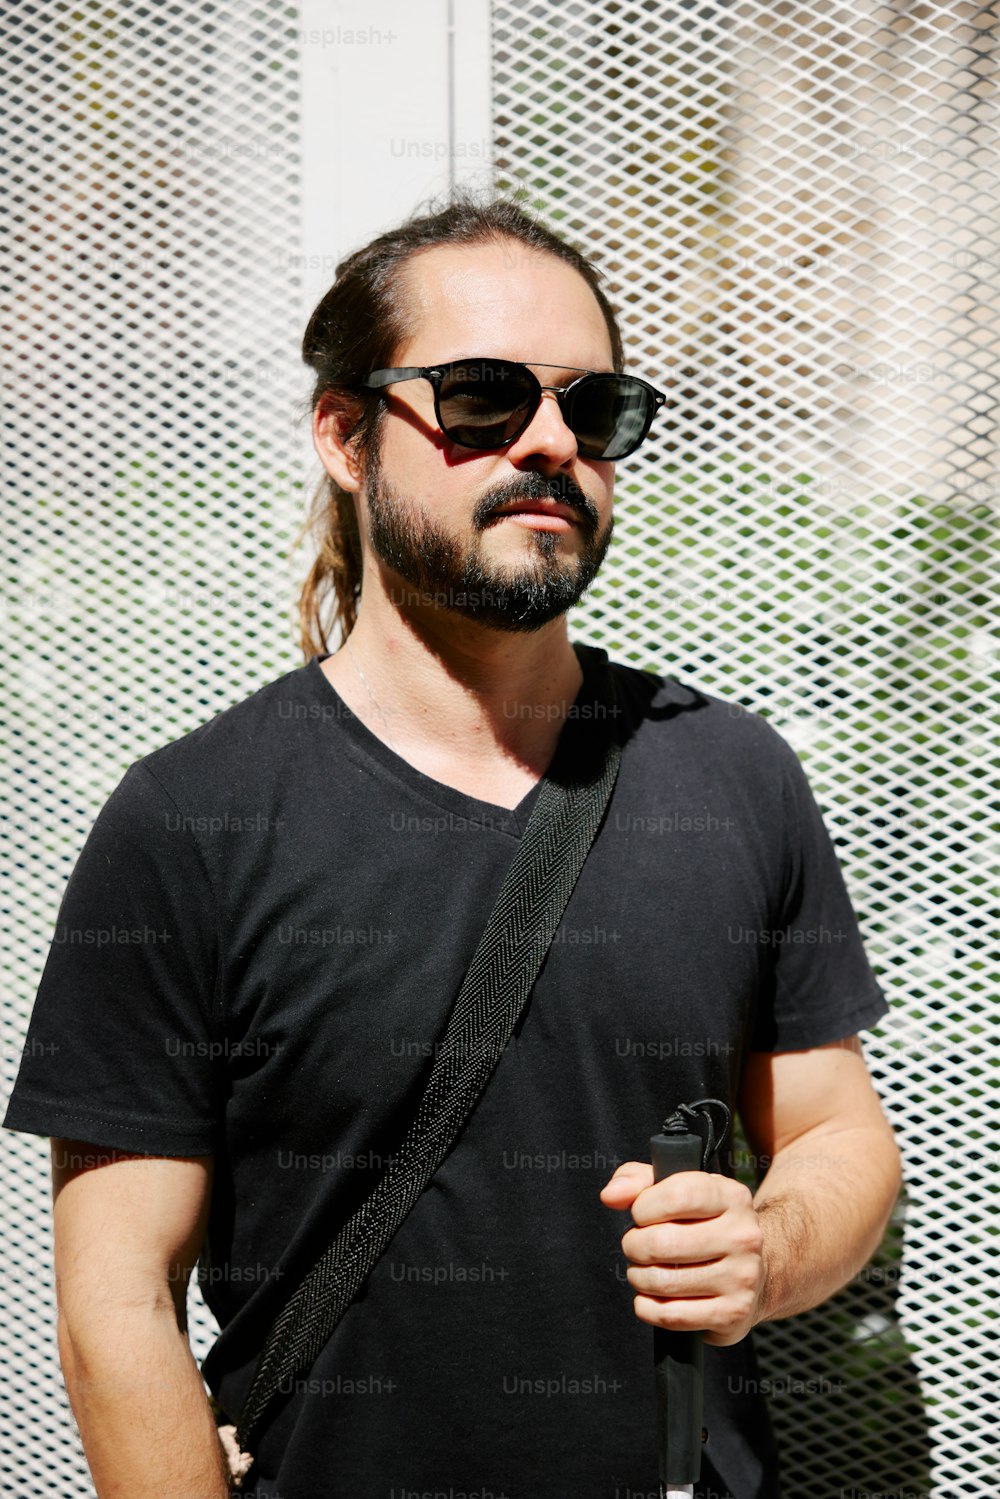 a man with long hair and sunglasses holding a cell phone